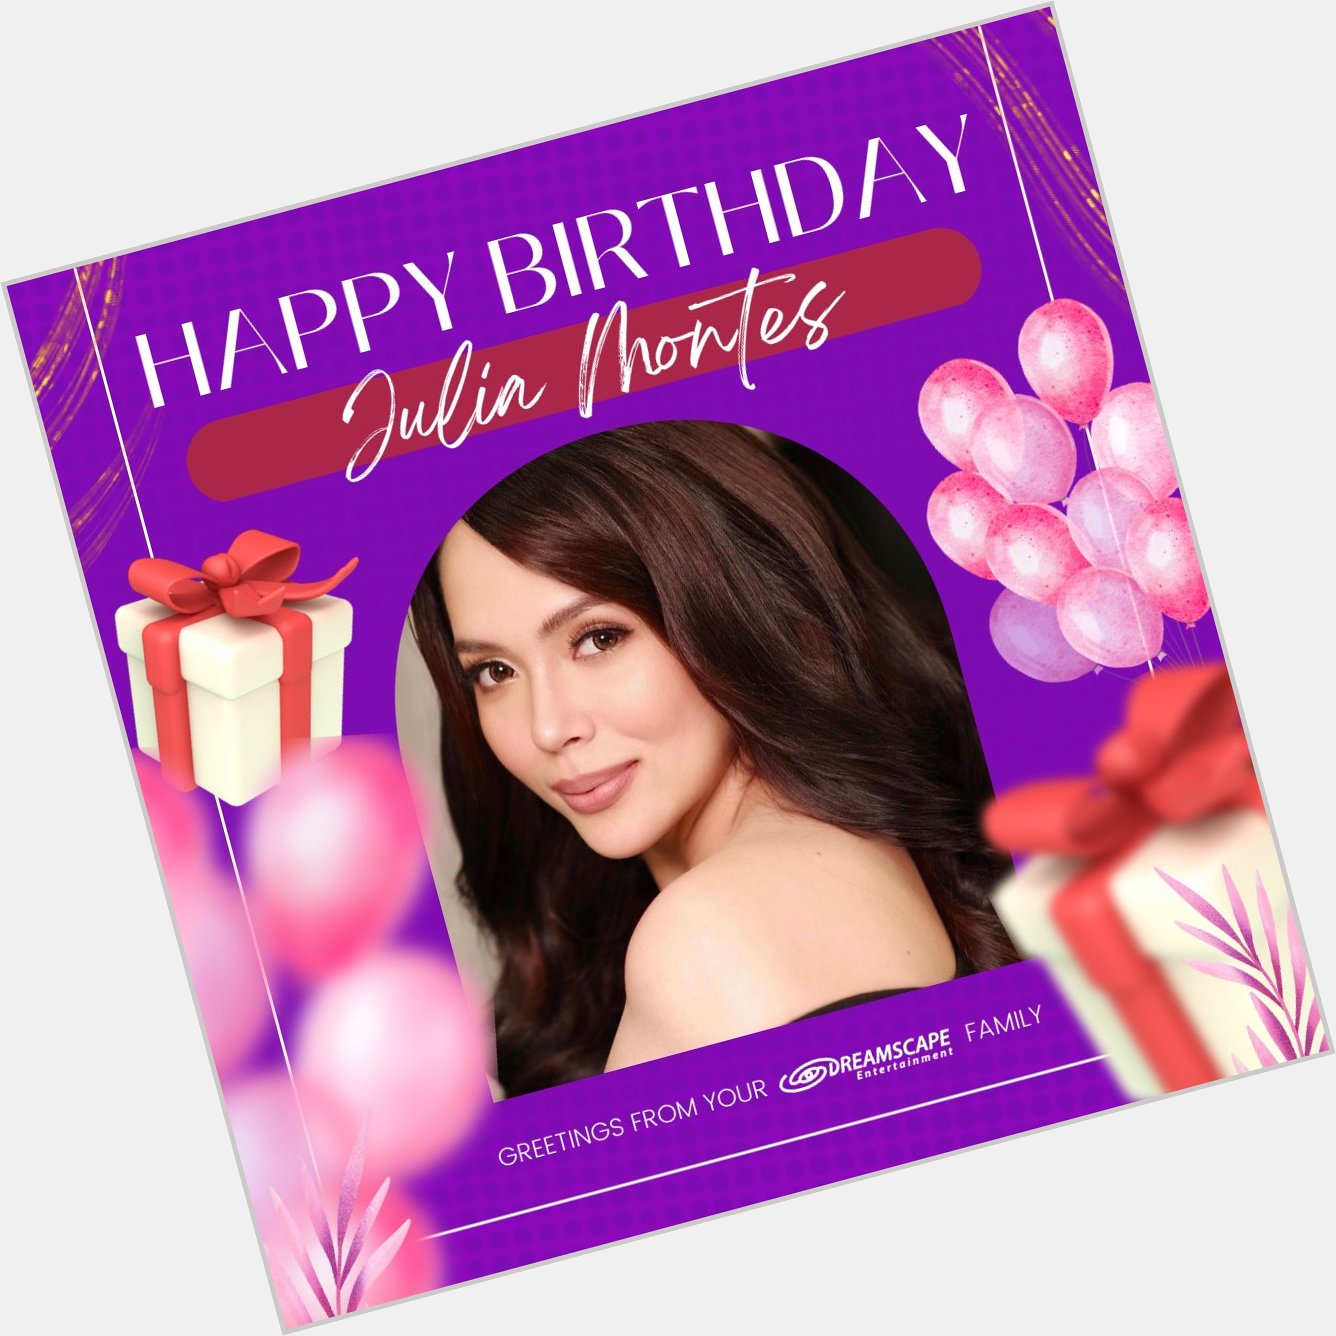 Happy Birthday Julia Montes!  Greetings from your Dreamscape family 